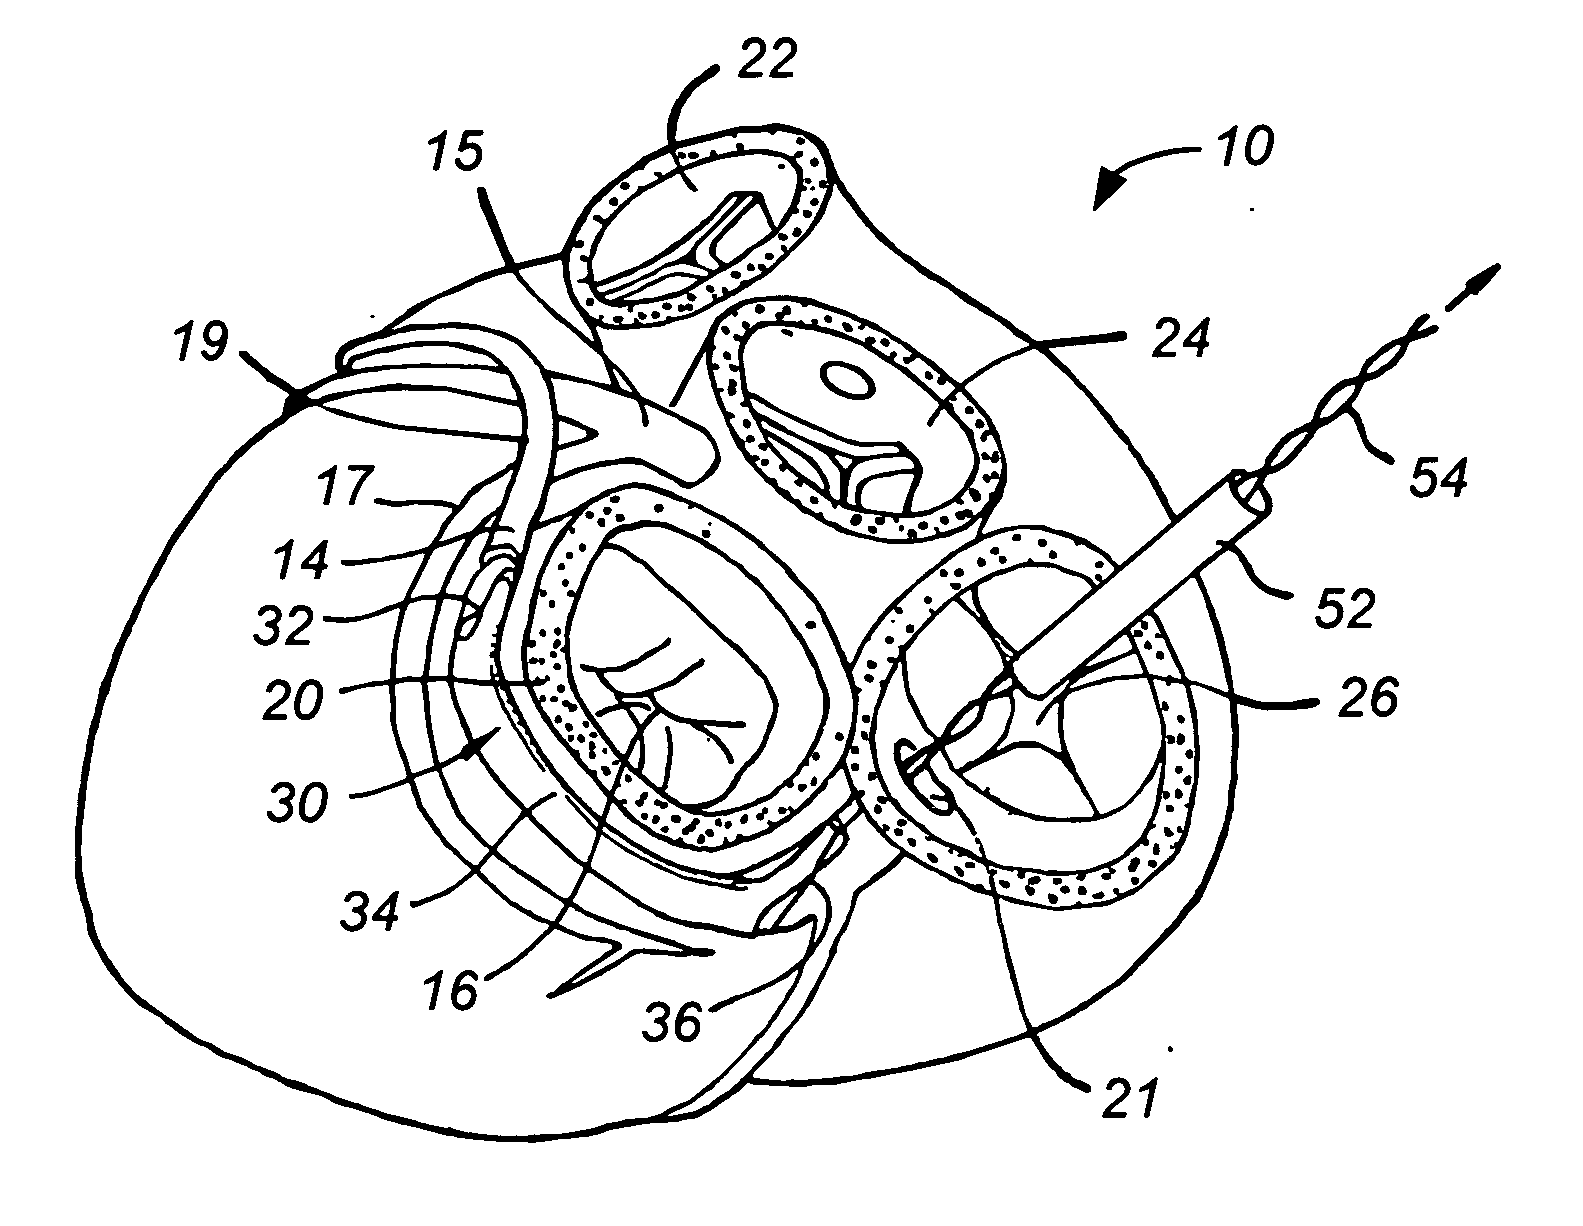 Fixed length anchor and pull mitral valve device and method